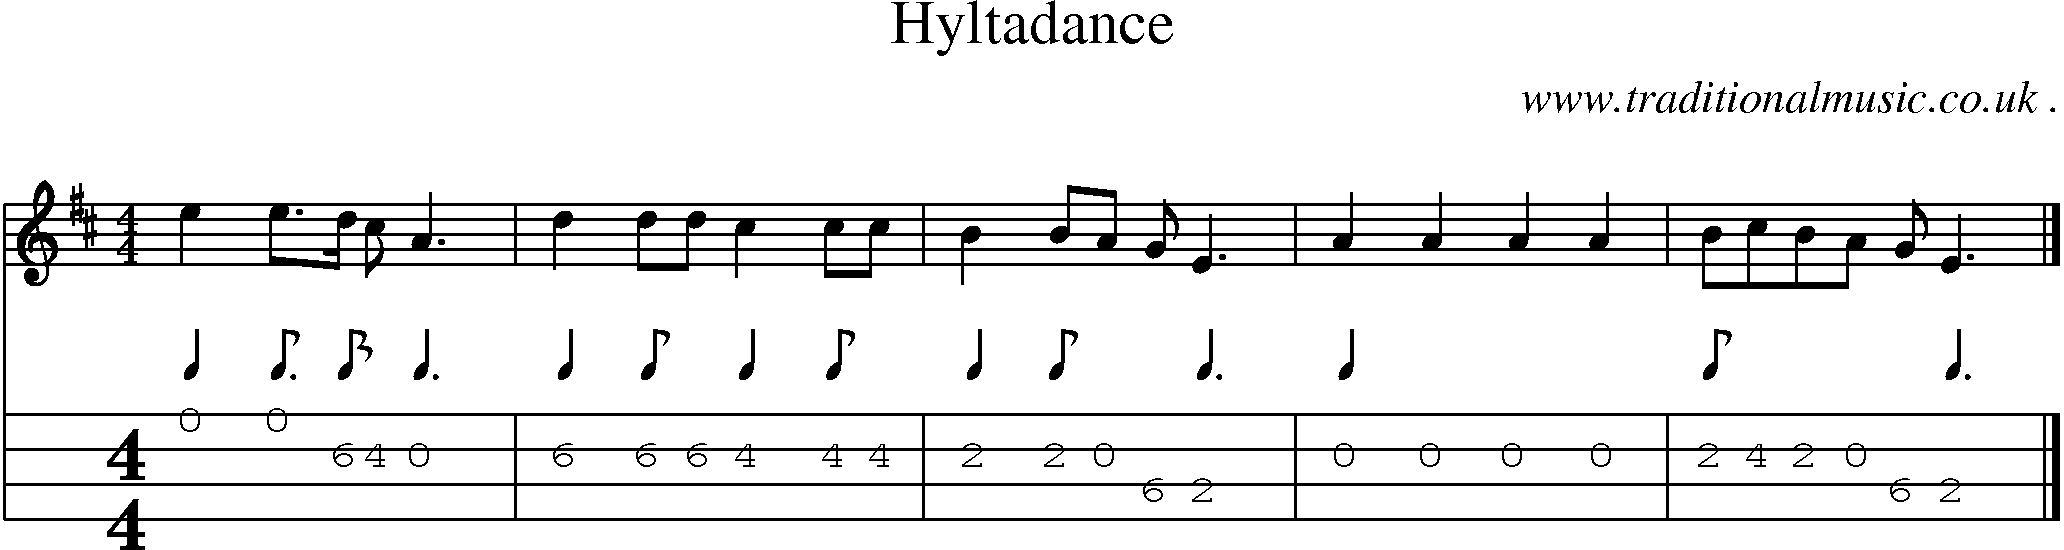 Sheet-music  score, Chords and Mandolin Tabs for Hyltadance